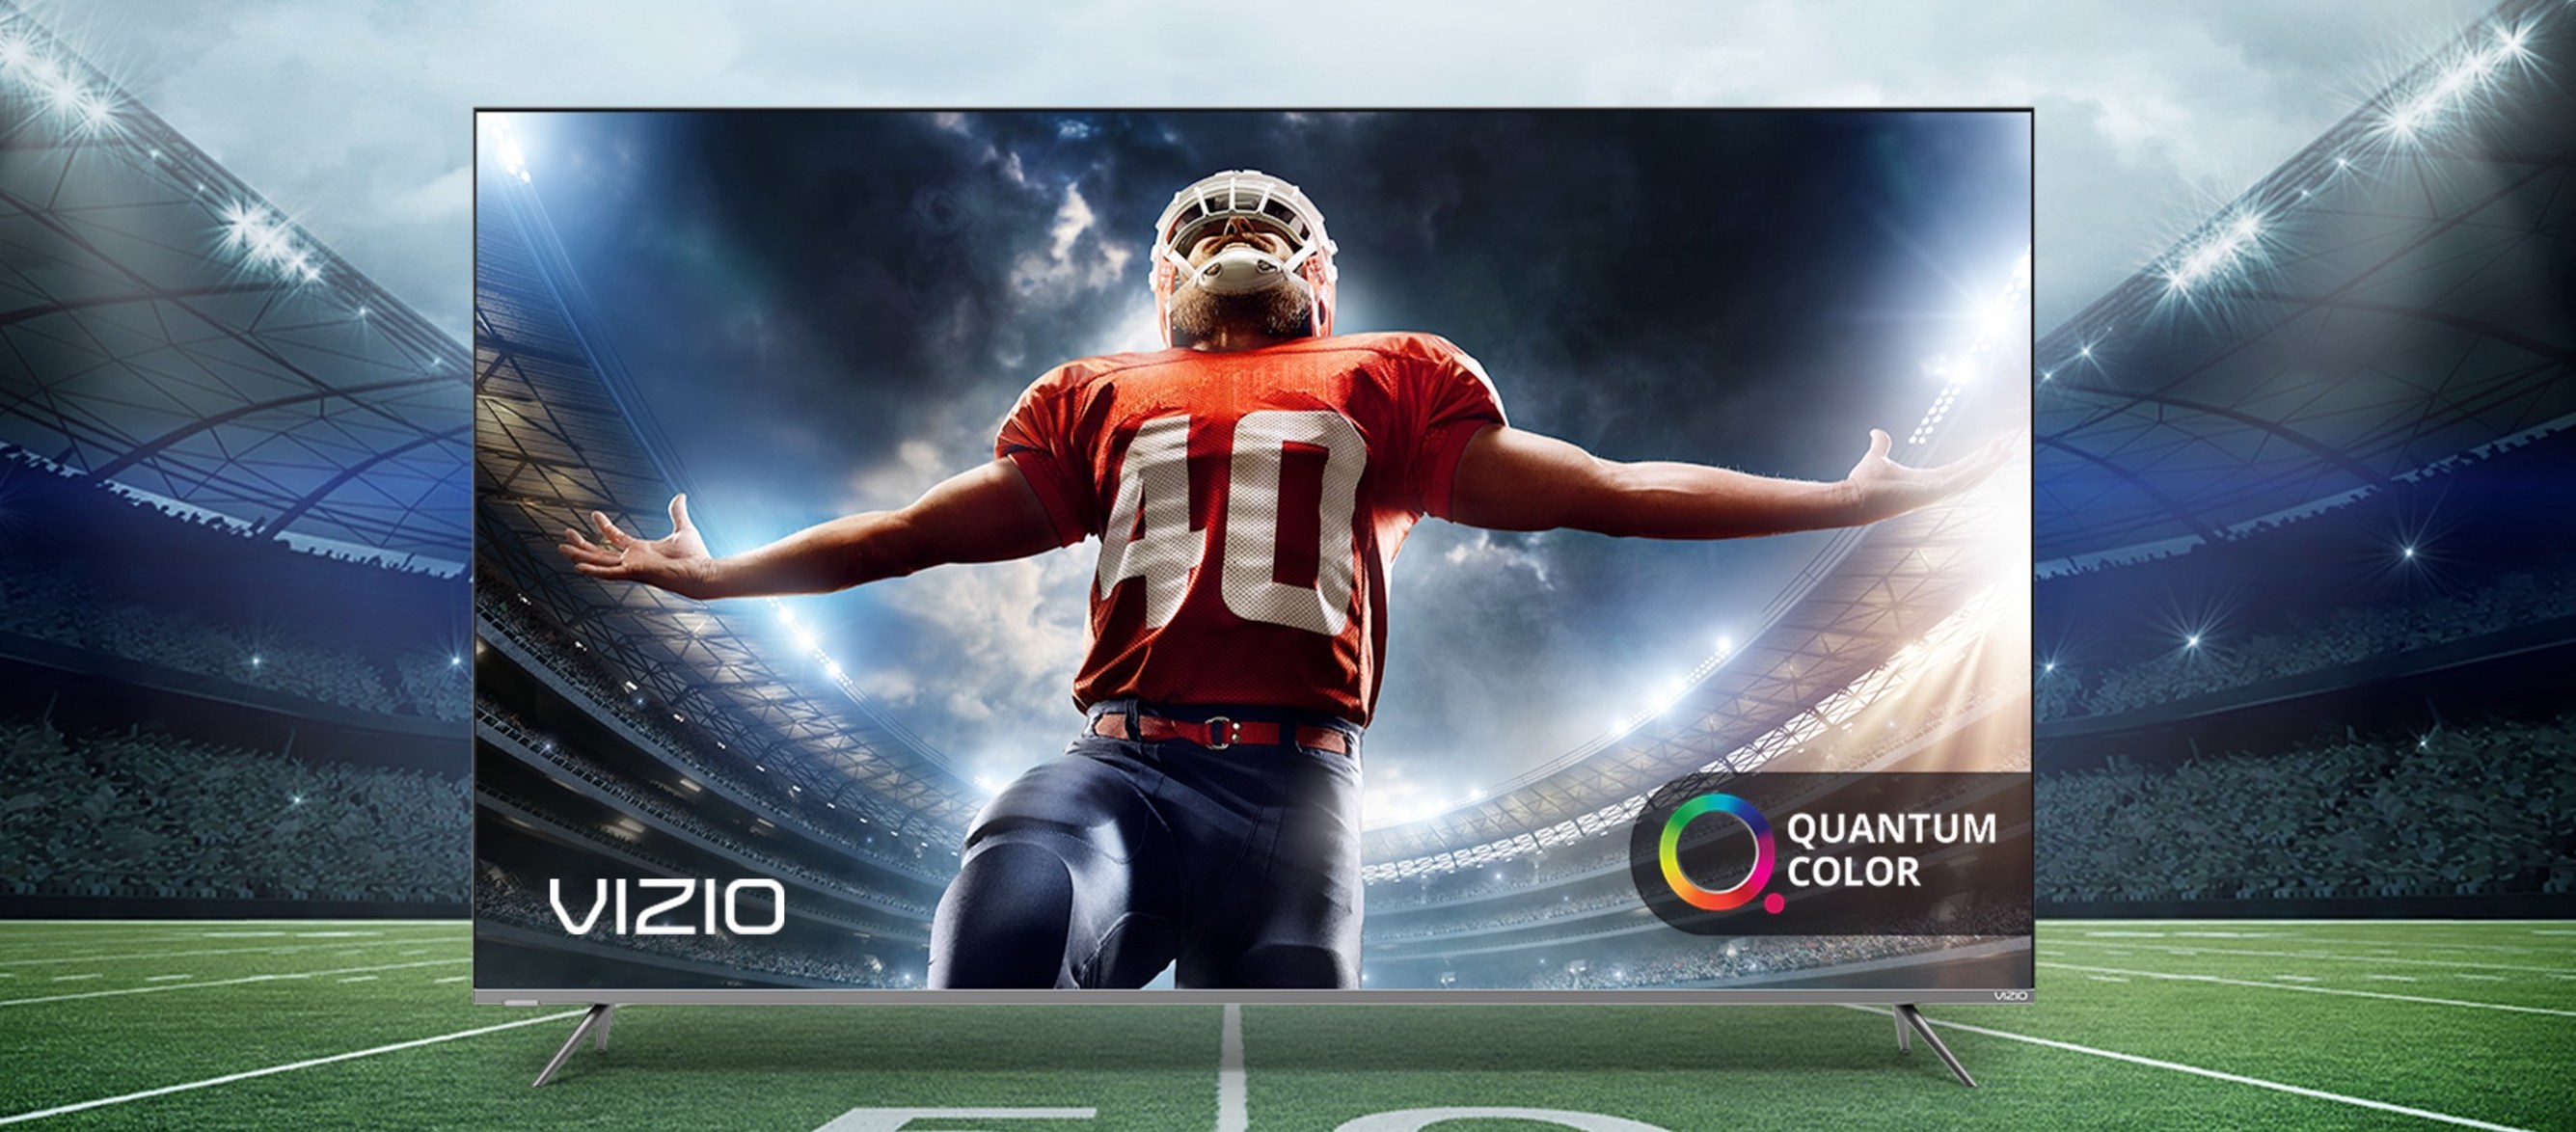 Audience Targeting Bolsters VIZIO Home Screen Promotions